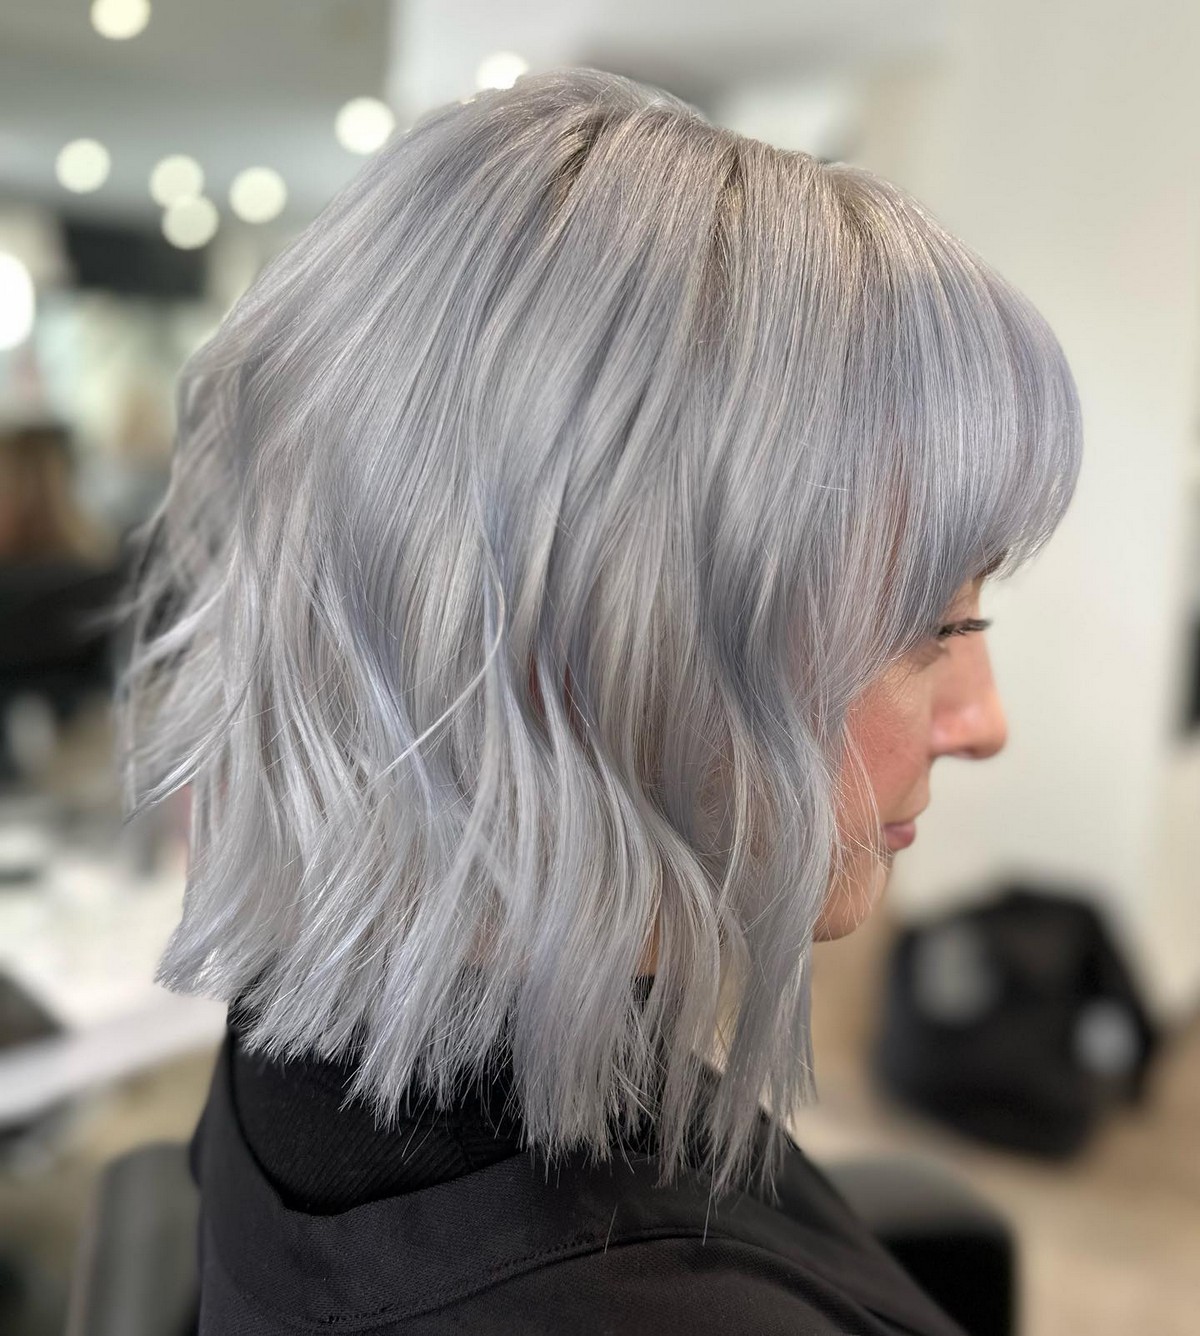 Sliver Blunt Wavy Bob With Bangs